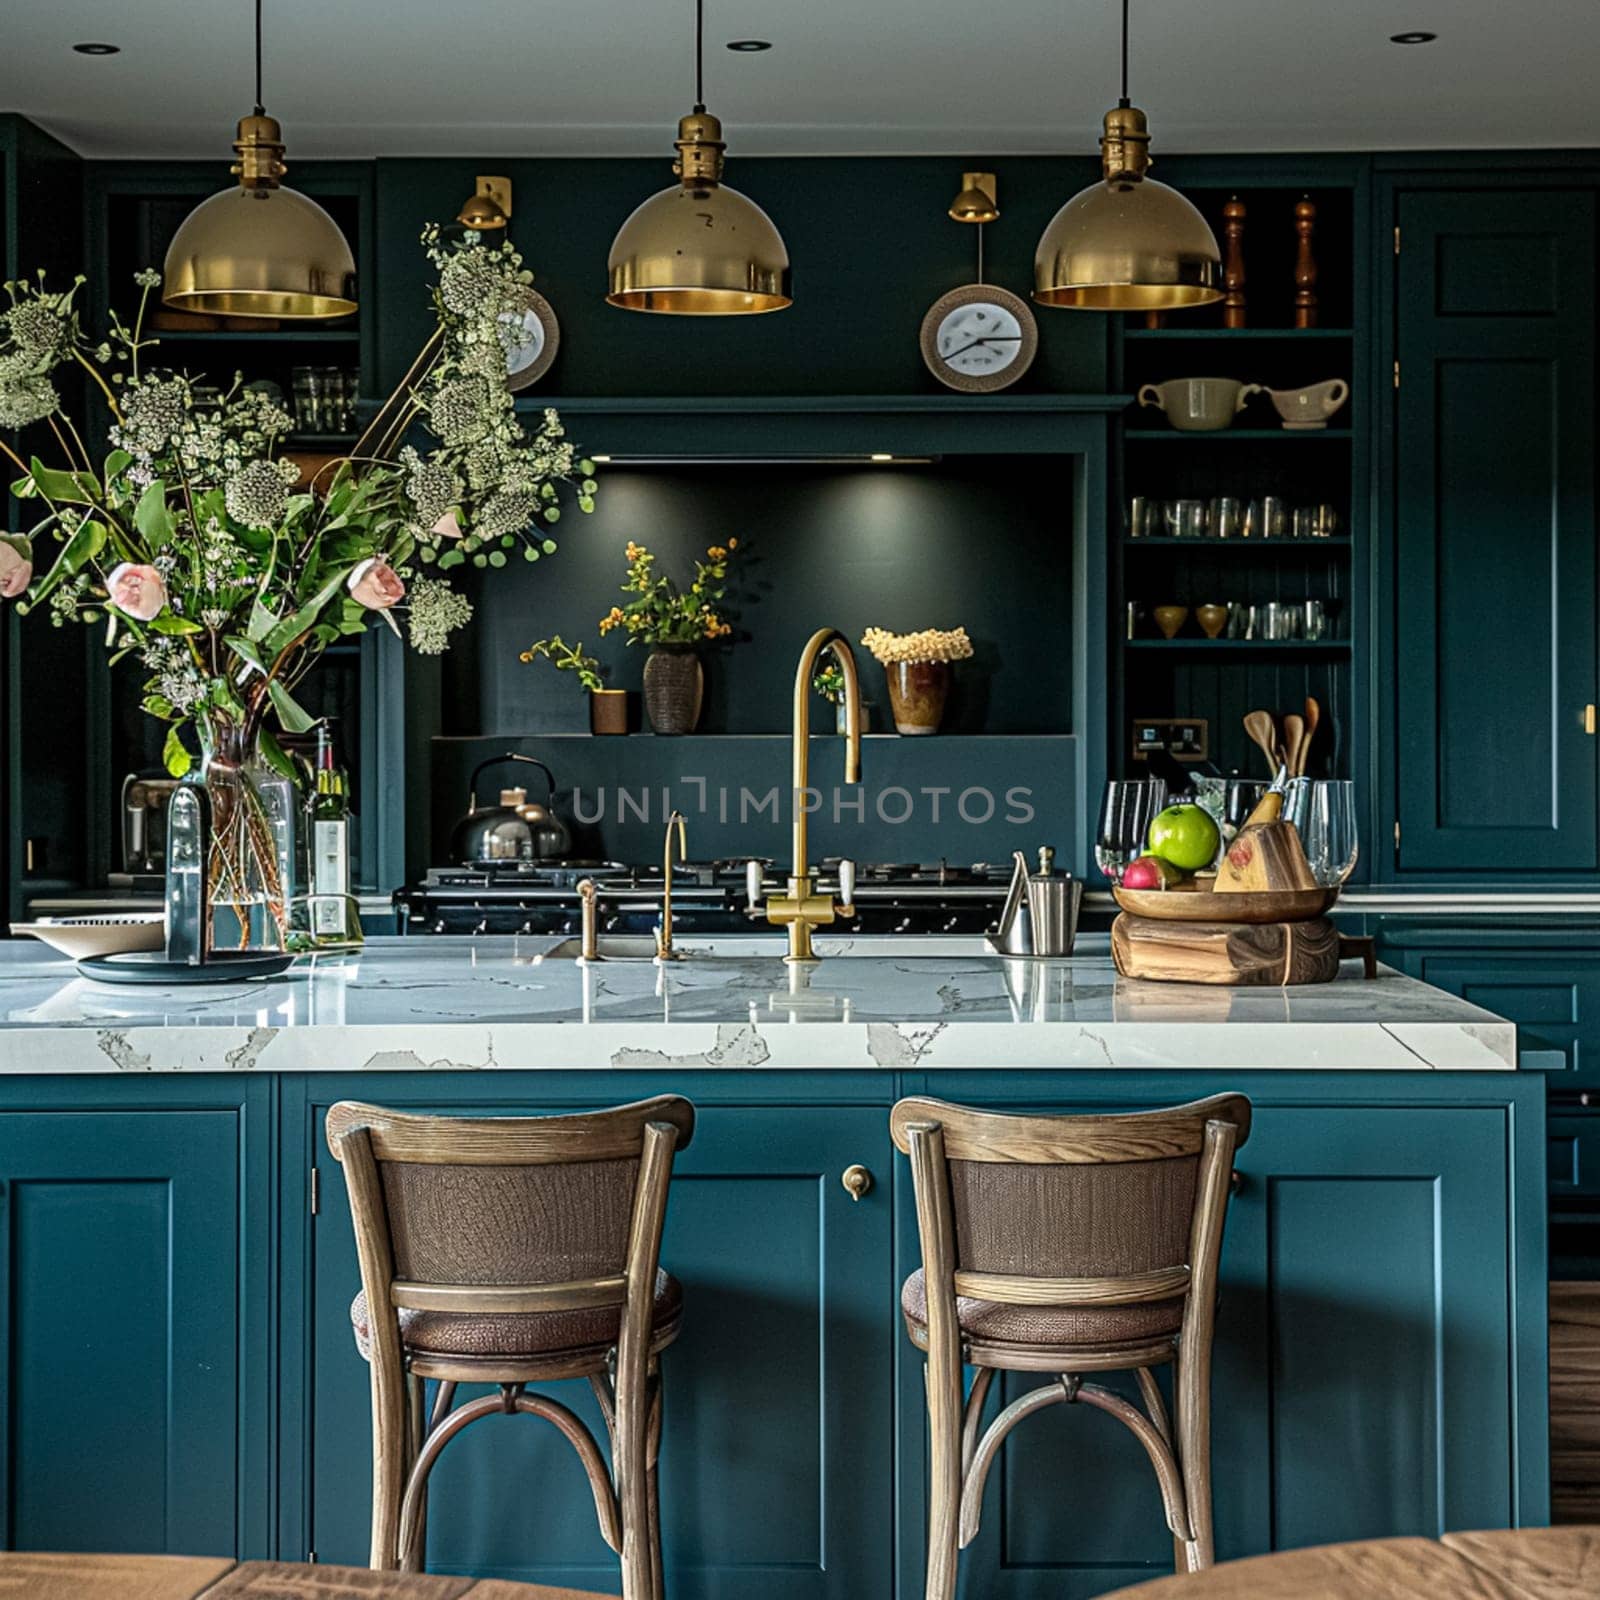 Bespoke kitchen design, country house and cottage interior design, English countryside style renovation and home decor by Anneleven